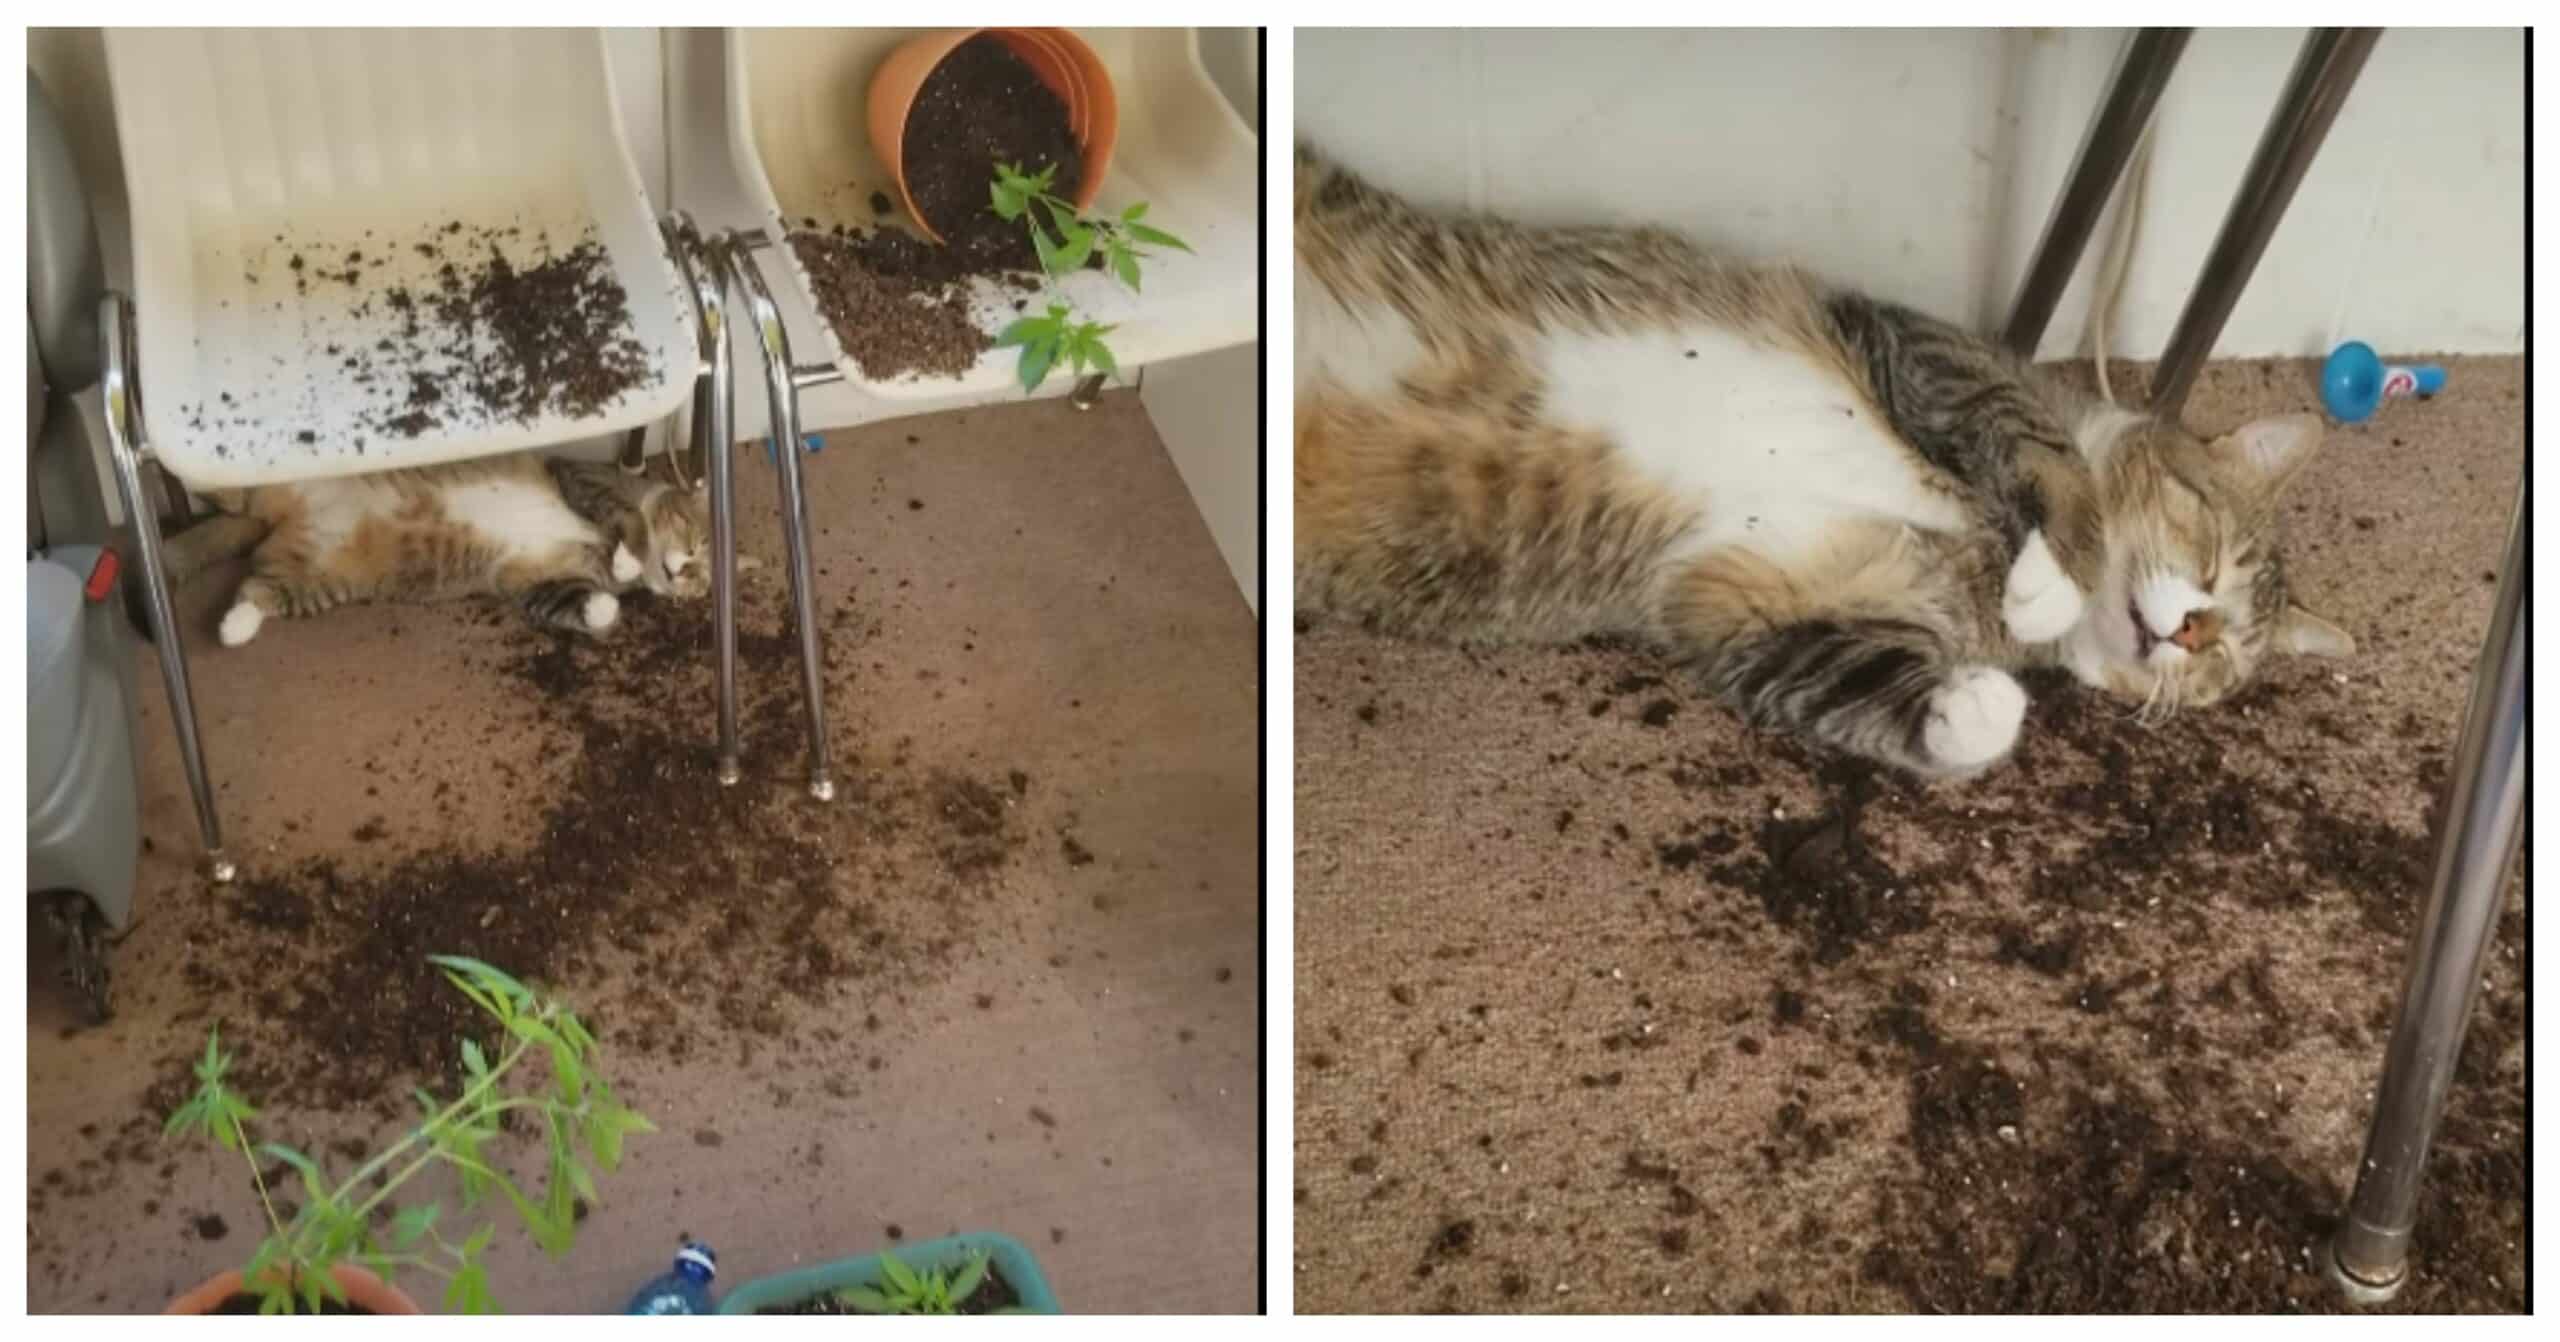 Cat ate Weed Accidentally Owner Records Her Uploads Video to Facebook